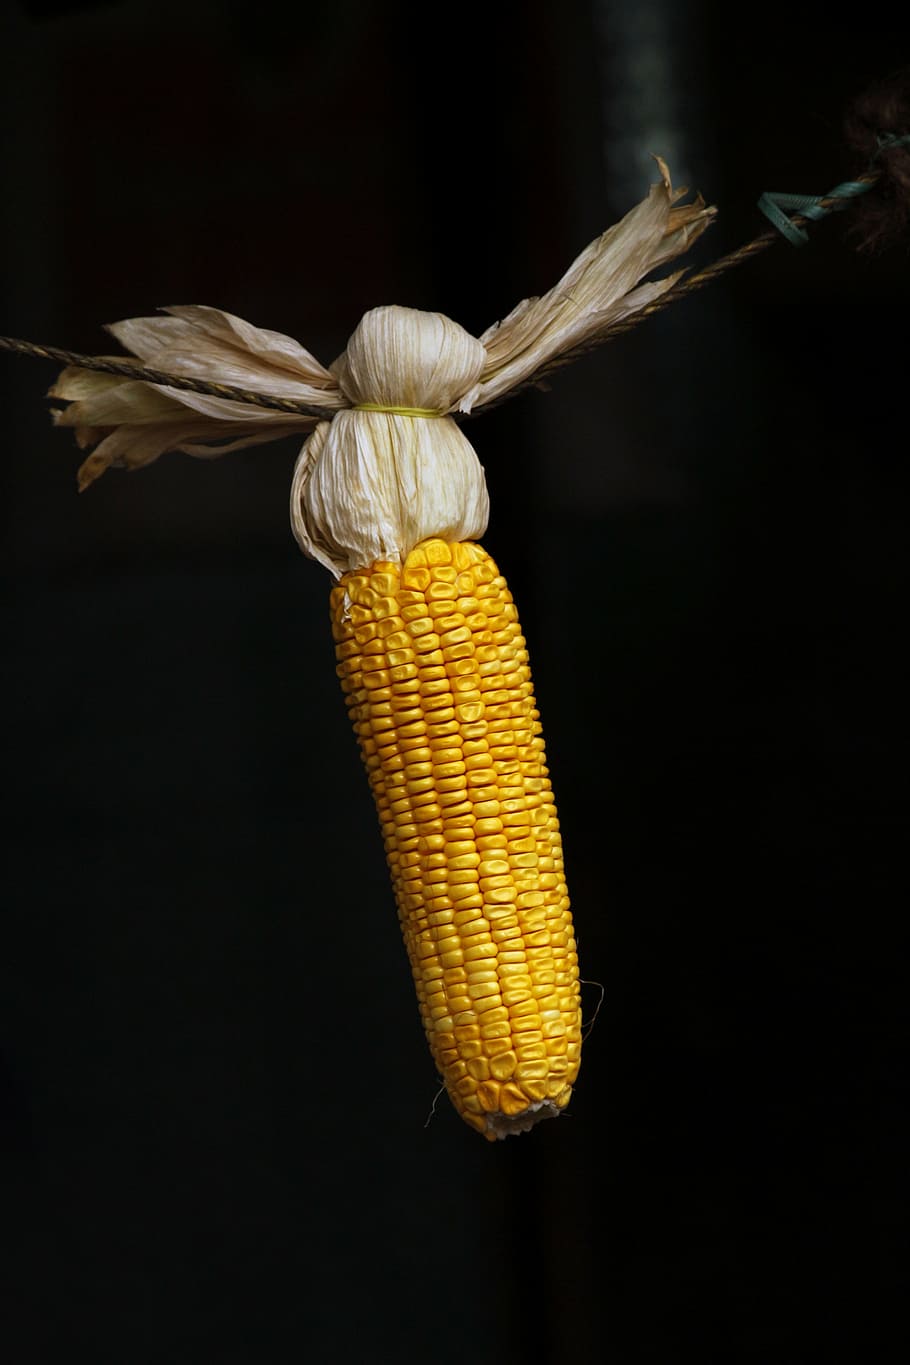 maize, grains, corn, food, yellow, seed, organic, healthy, natural, agriculture